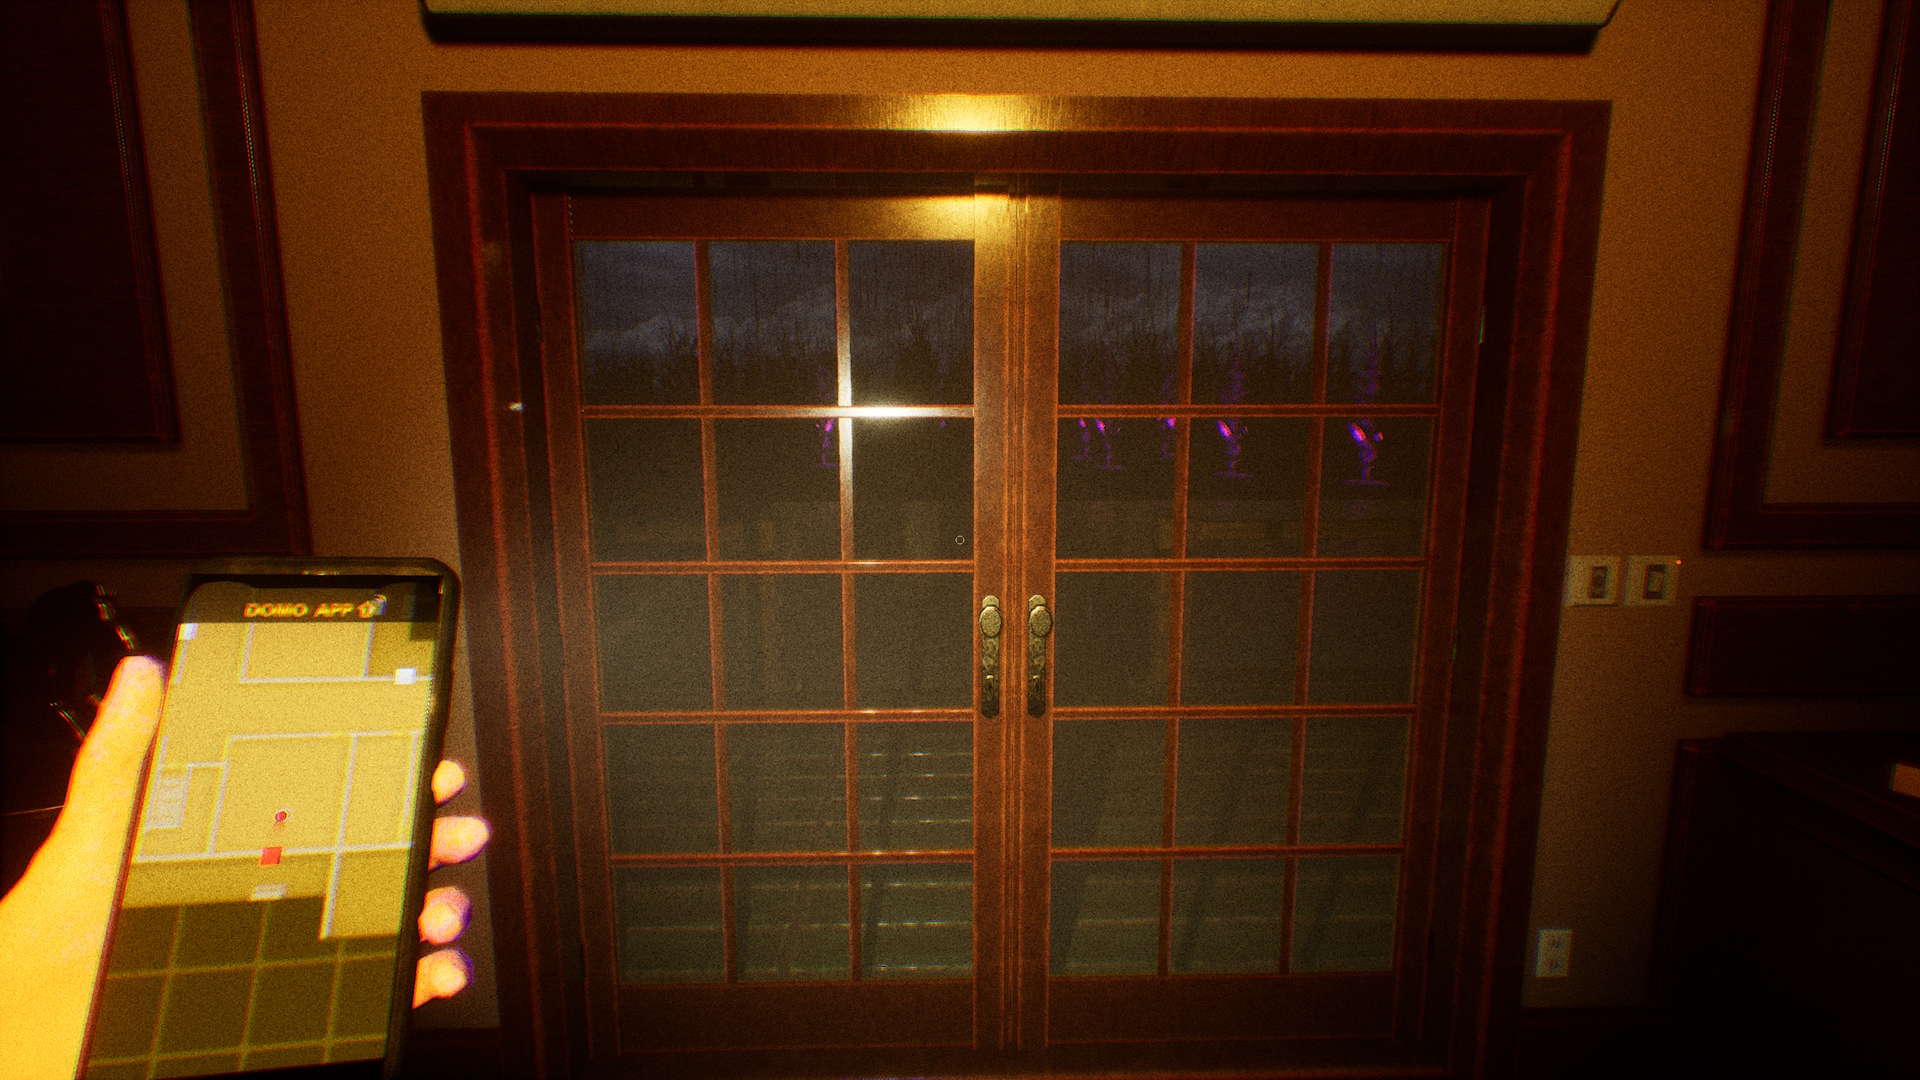 A set of closed French doors show the way into a crop field. Strange purple luminescence glows from areas of the crops. No sensible person will go outside tonight.